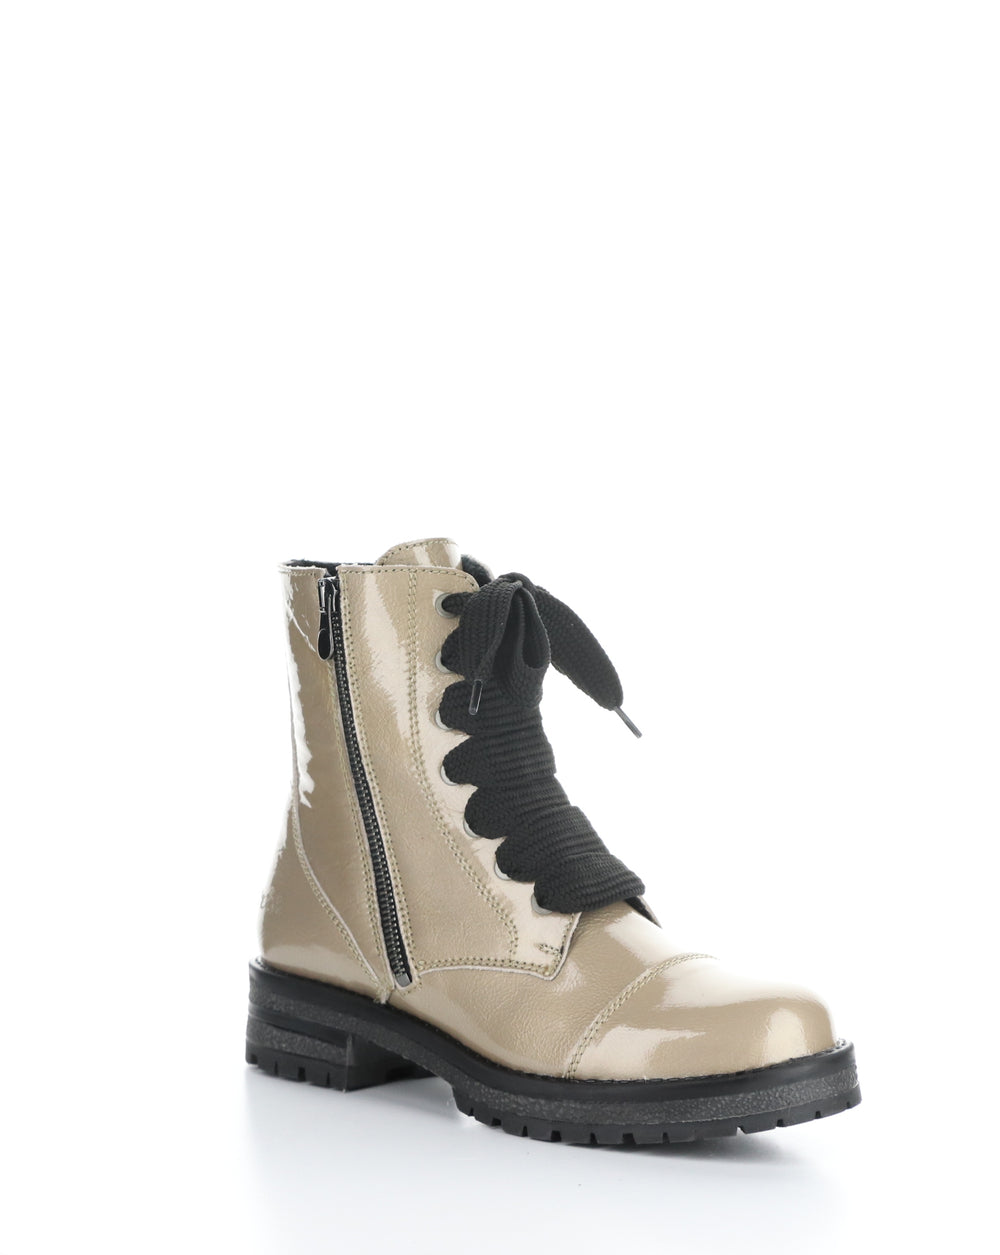 PAULIE TAUPE Round Toe Boots